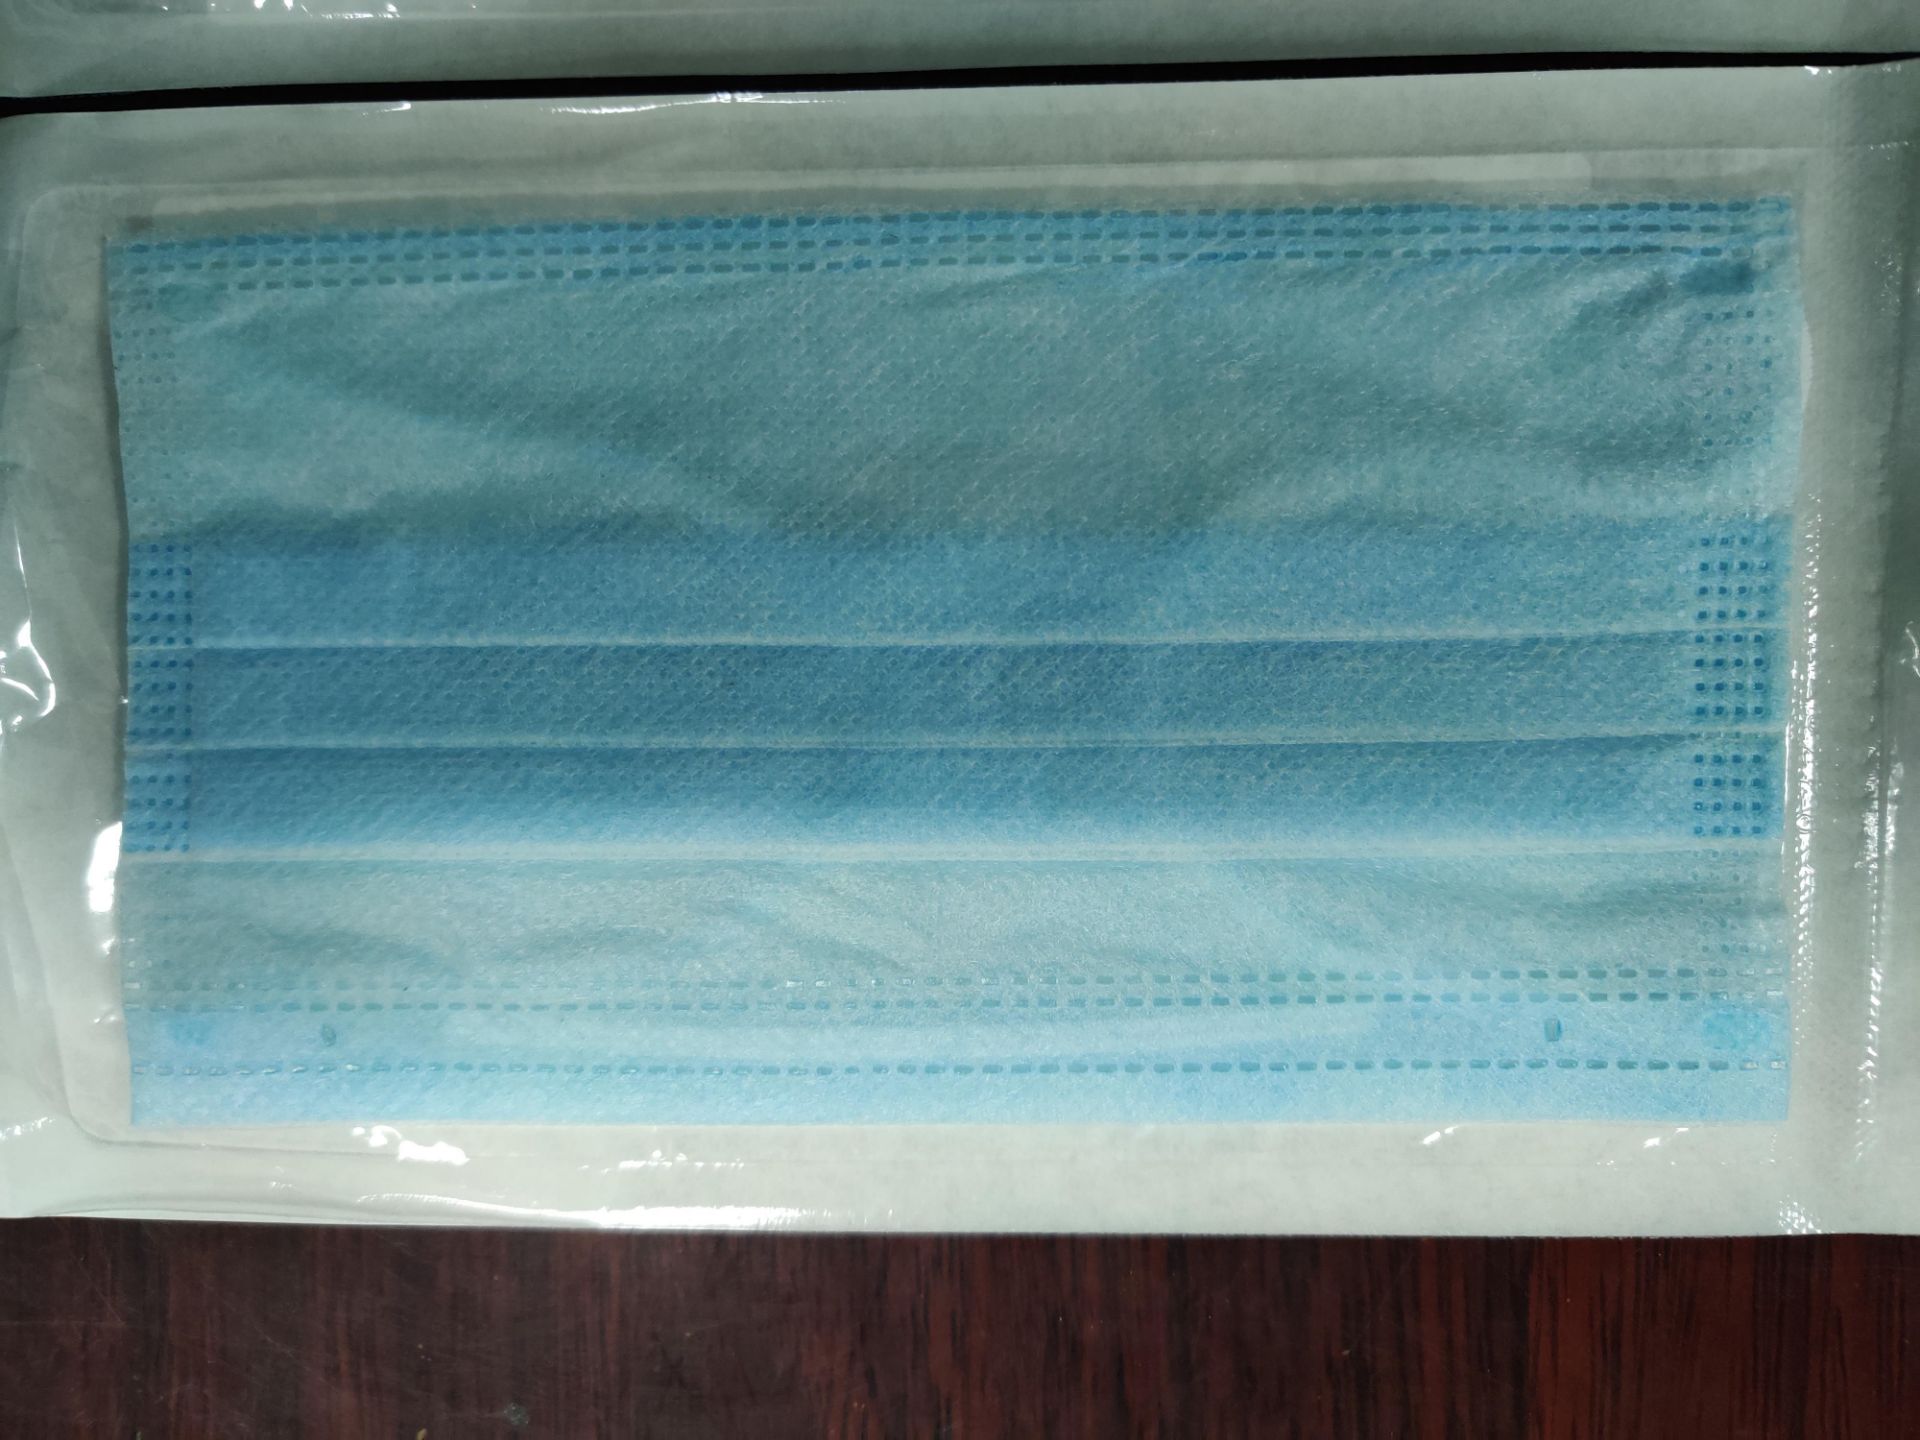 Type IIR Triple Layer Surgical Face Masks (2000pcs) UK delivery included - Image 8 of 8